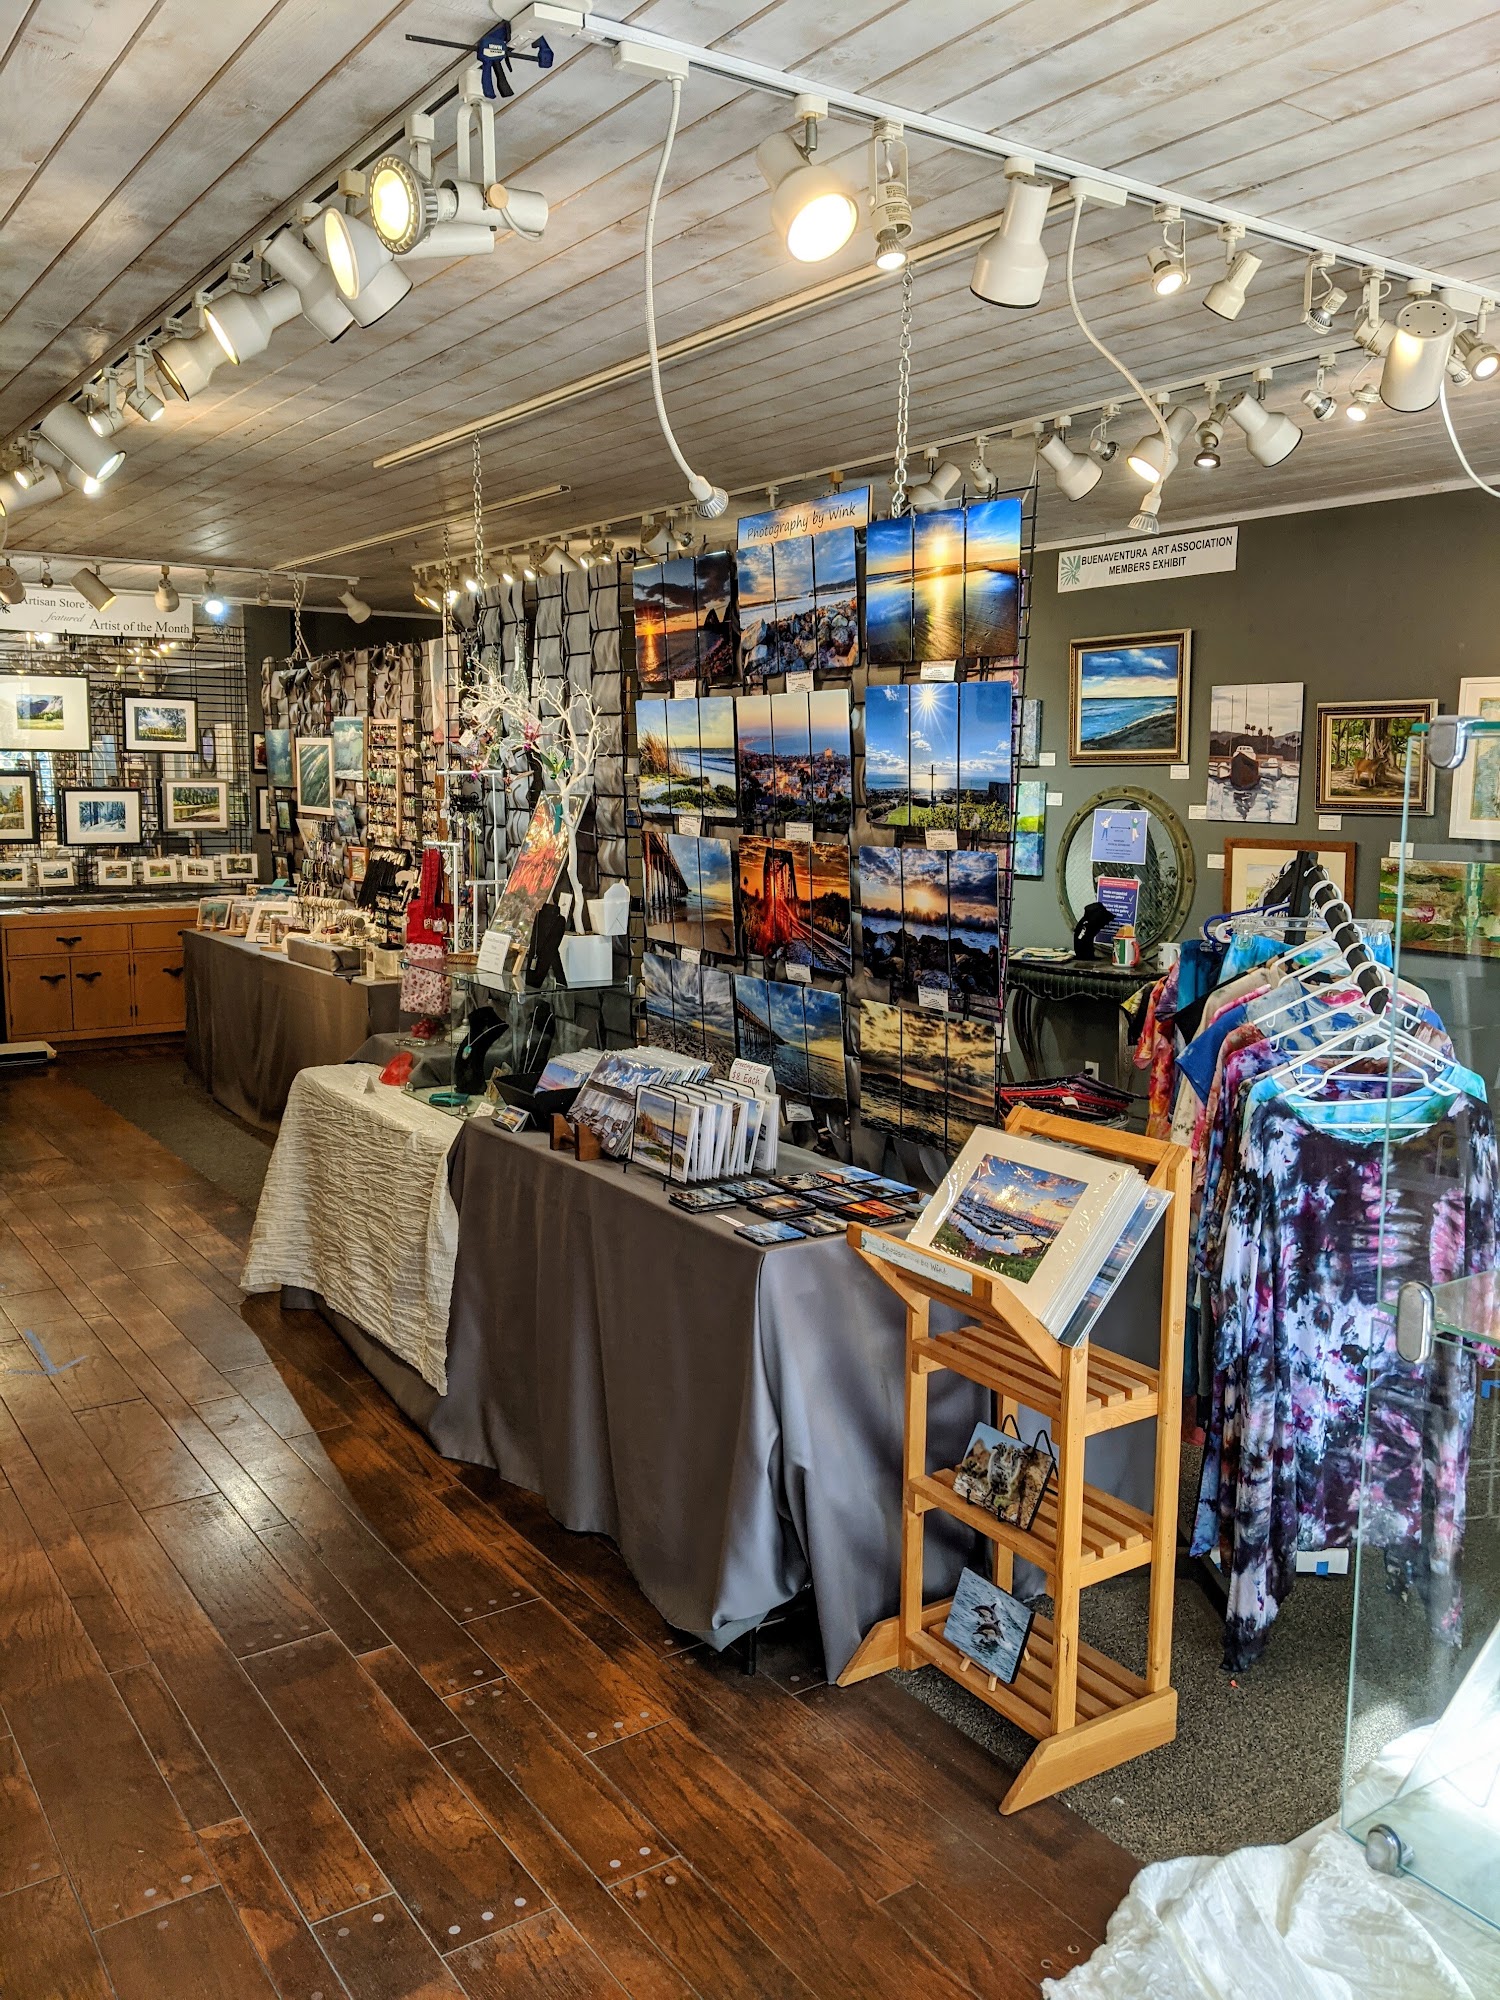 Harbor Village Gallery & Gifts